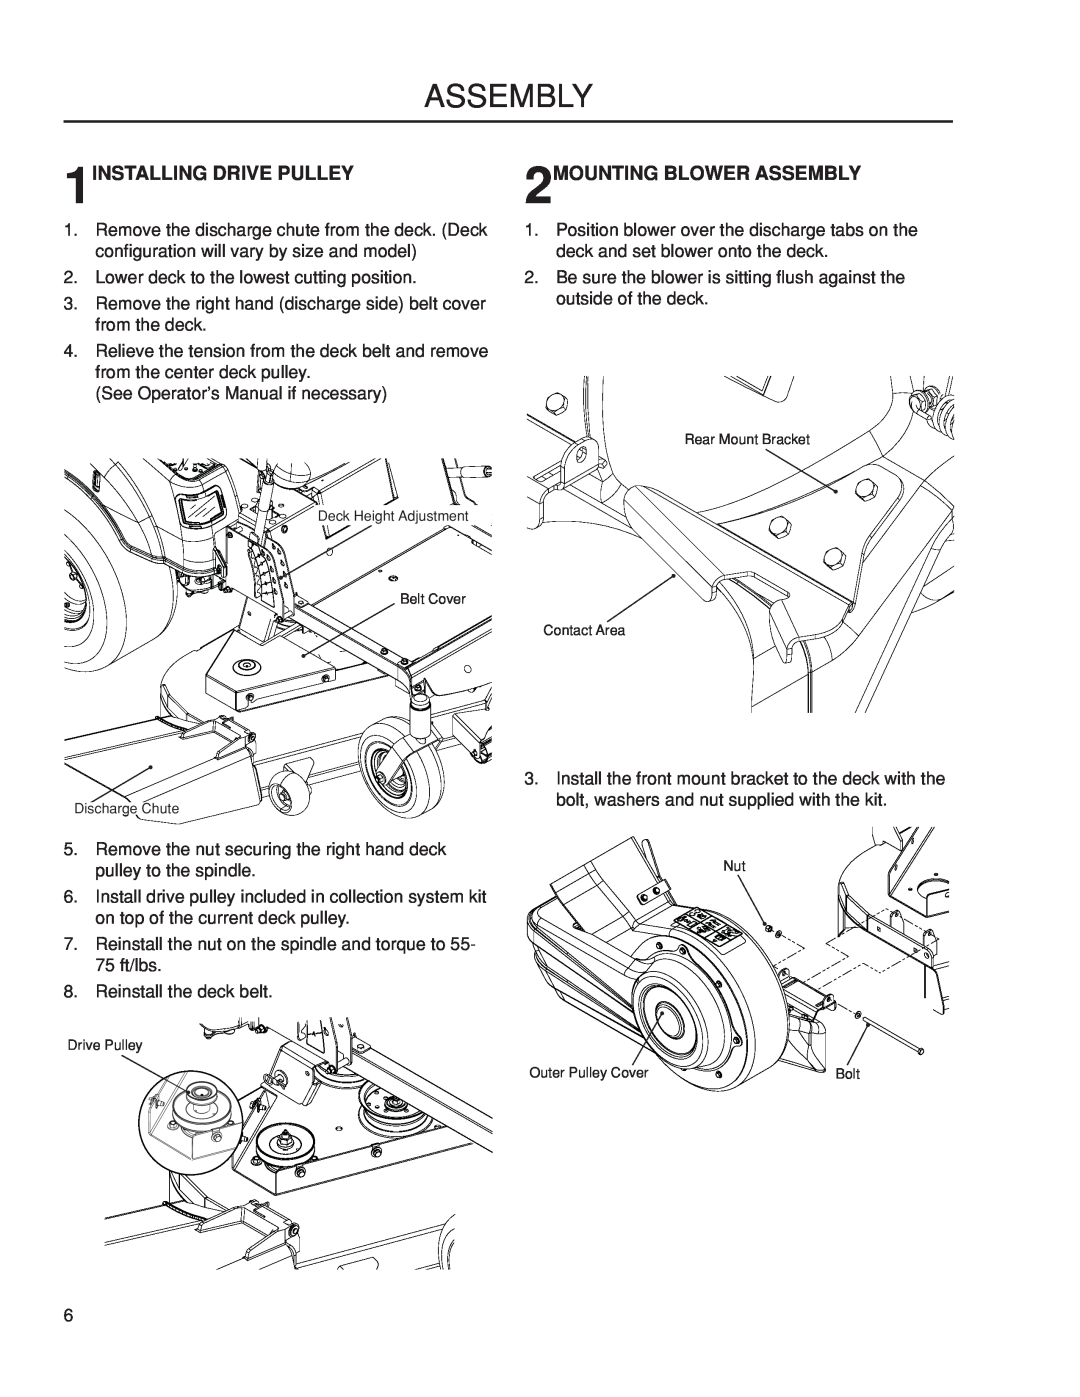 Dixon 966412801, 115 239947 manual Assembly, 1INSTALLING DRIVE PULLEY, 2MOUNTING BLOWER ASSEMBLY 